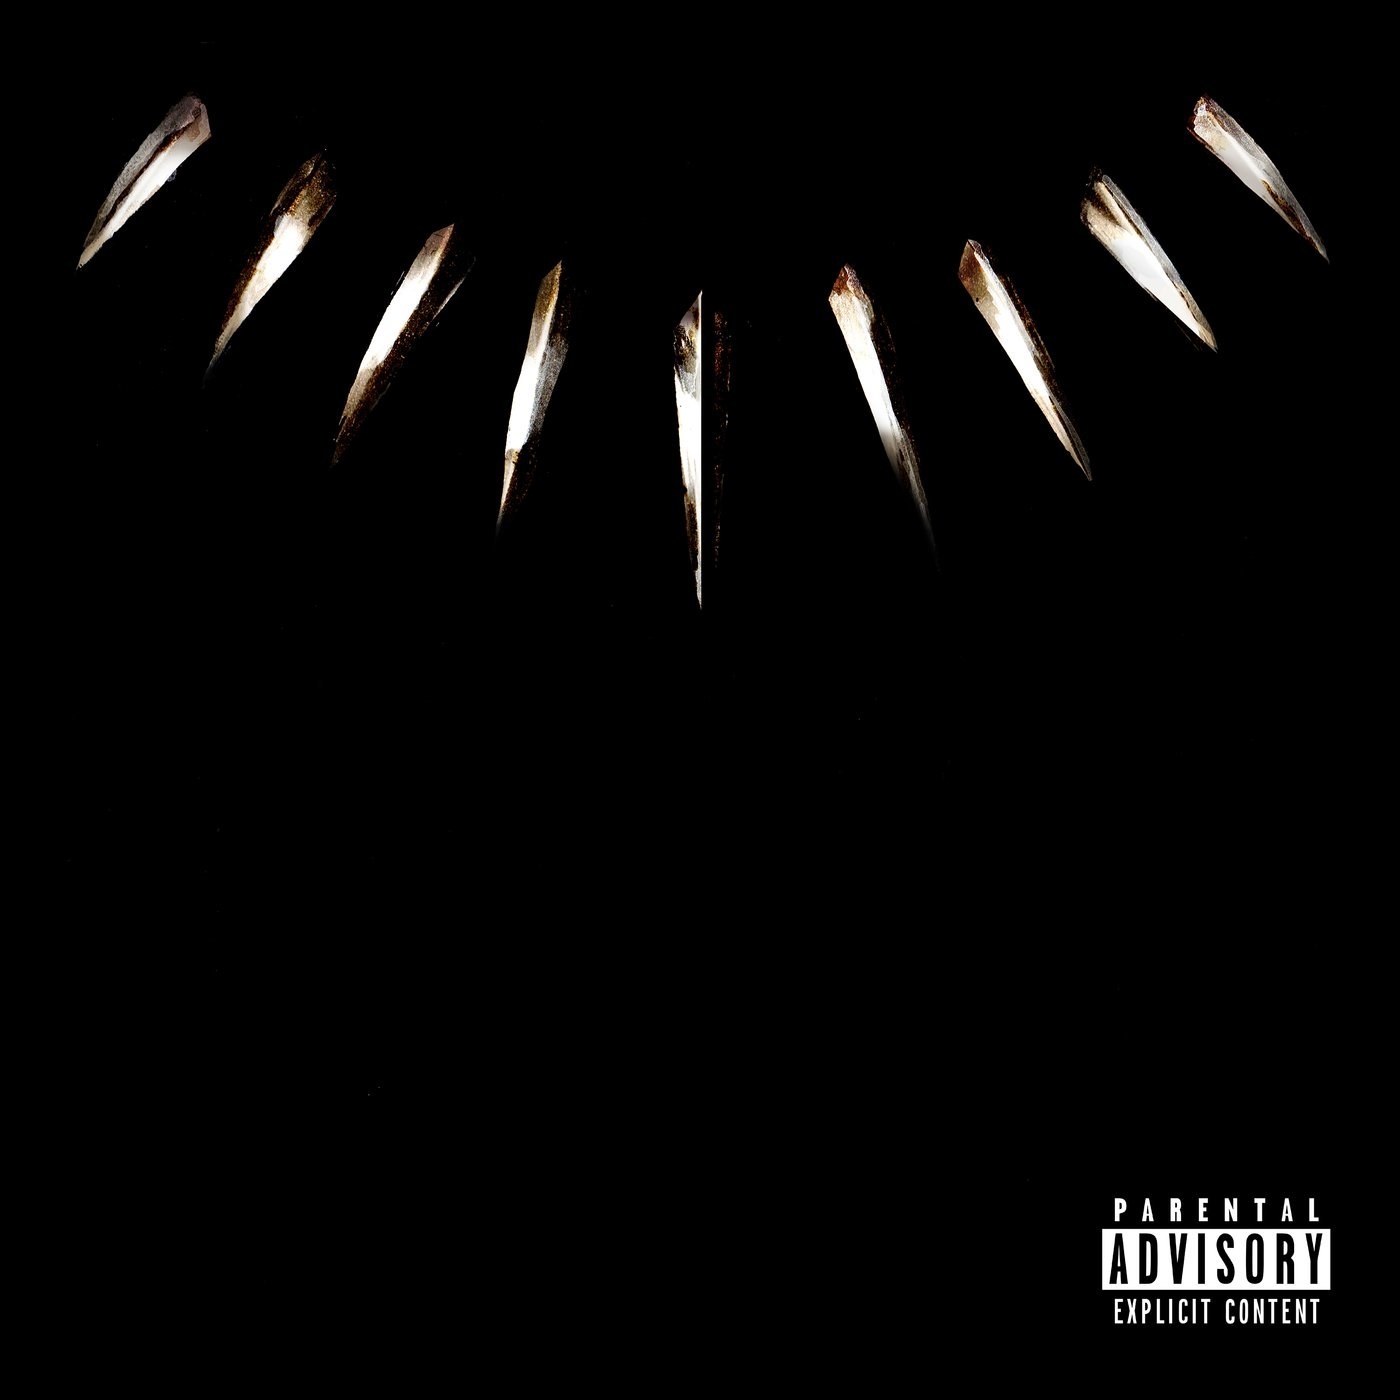 The album cover for Black Panther